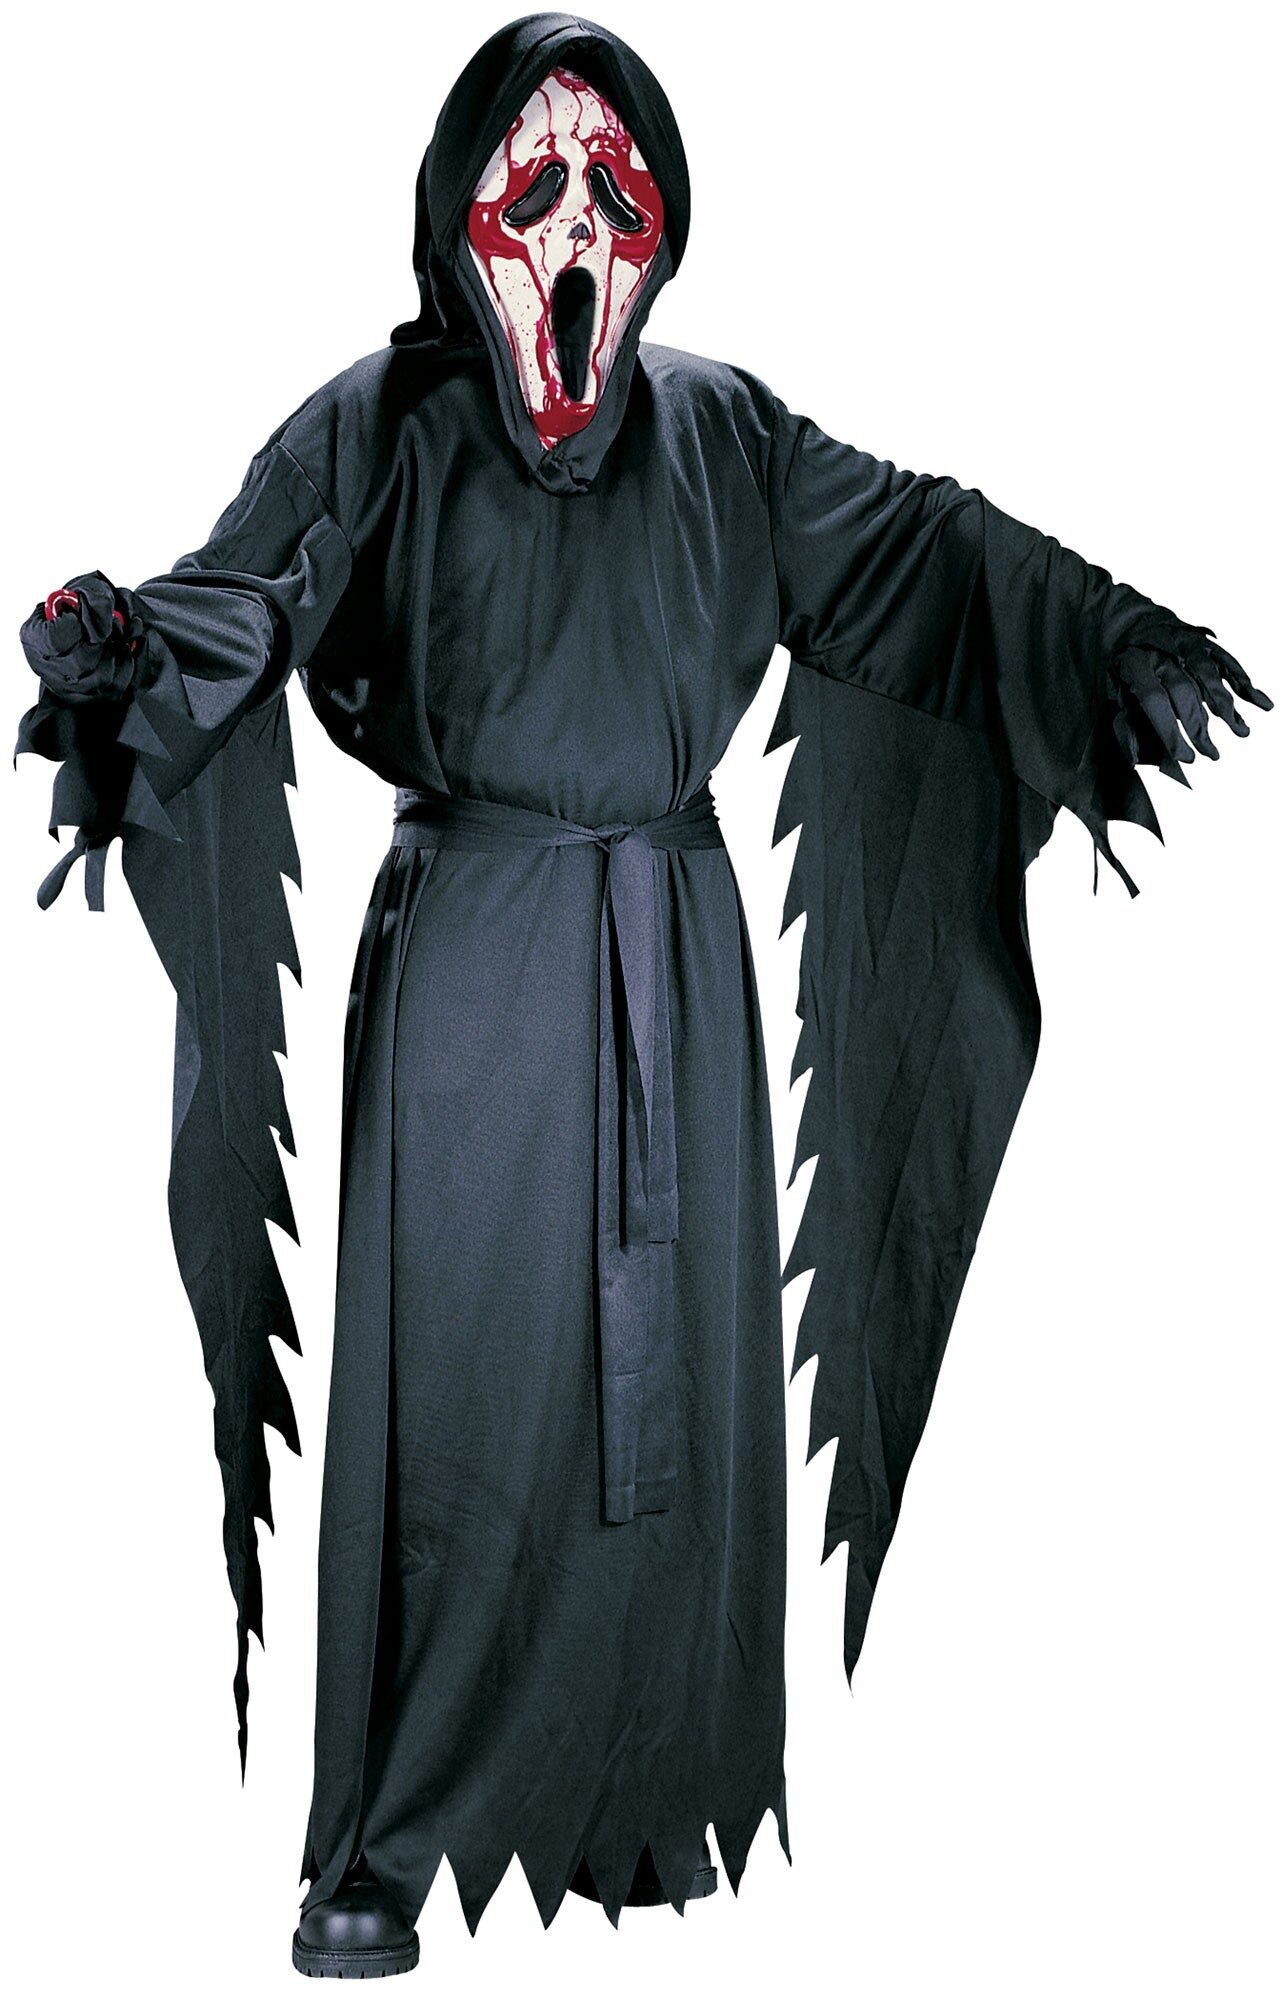 Officially licensed Scream costume. 